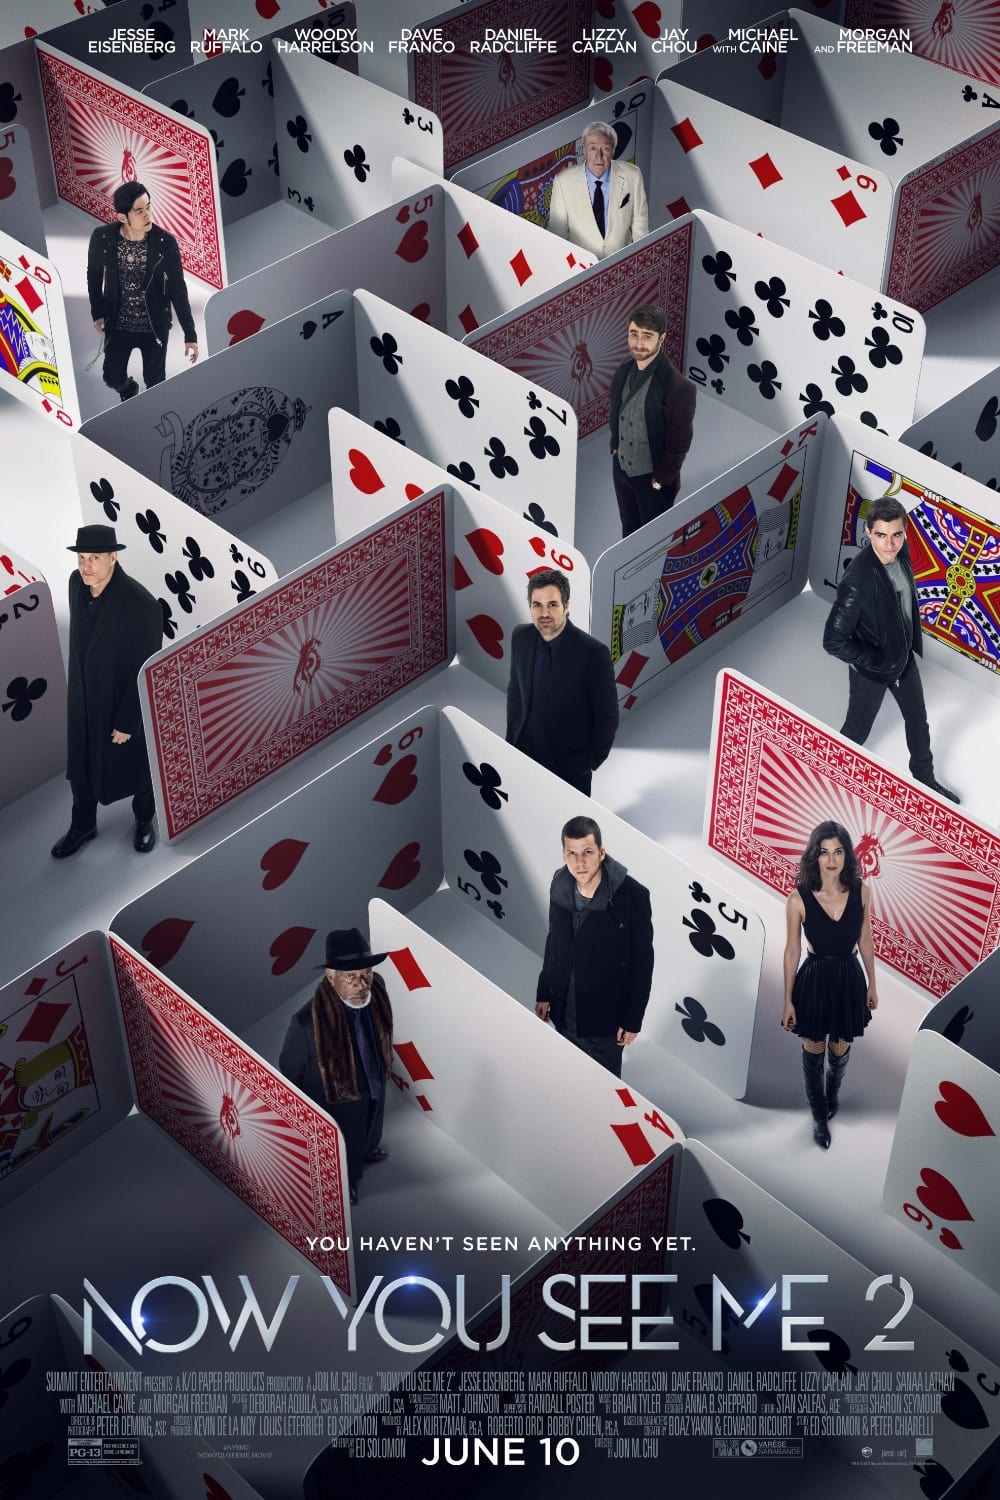 Now You See Me 2 (2016) REMUX 4K HDR Latino – CMHDD